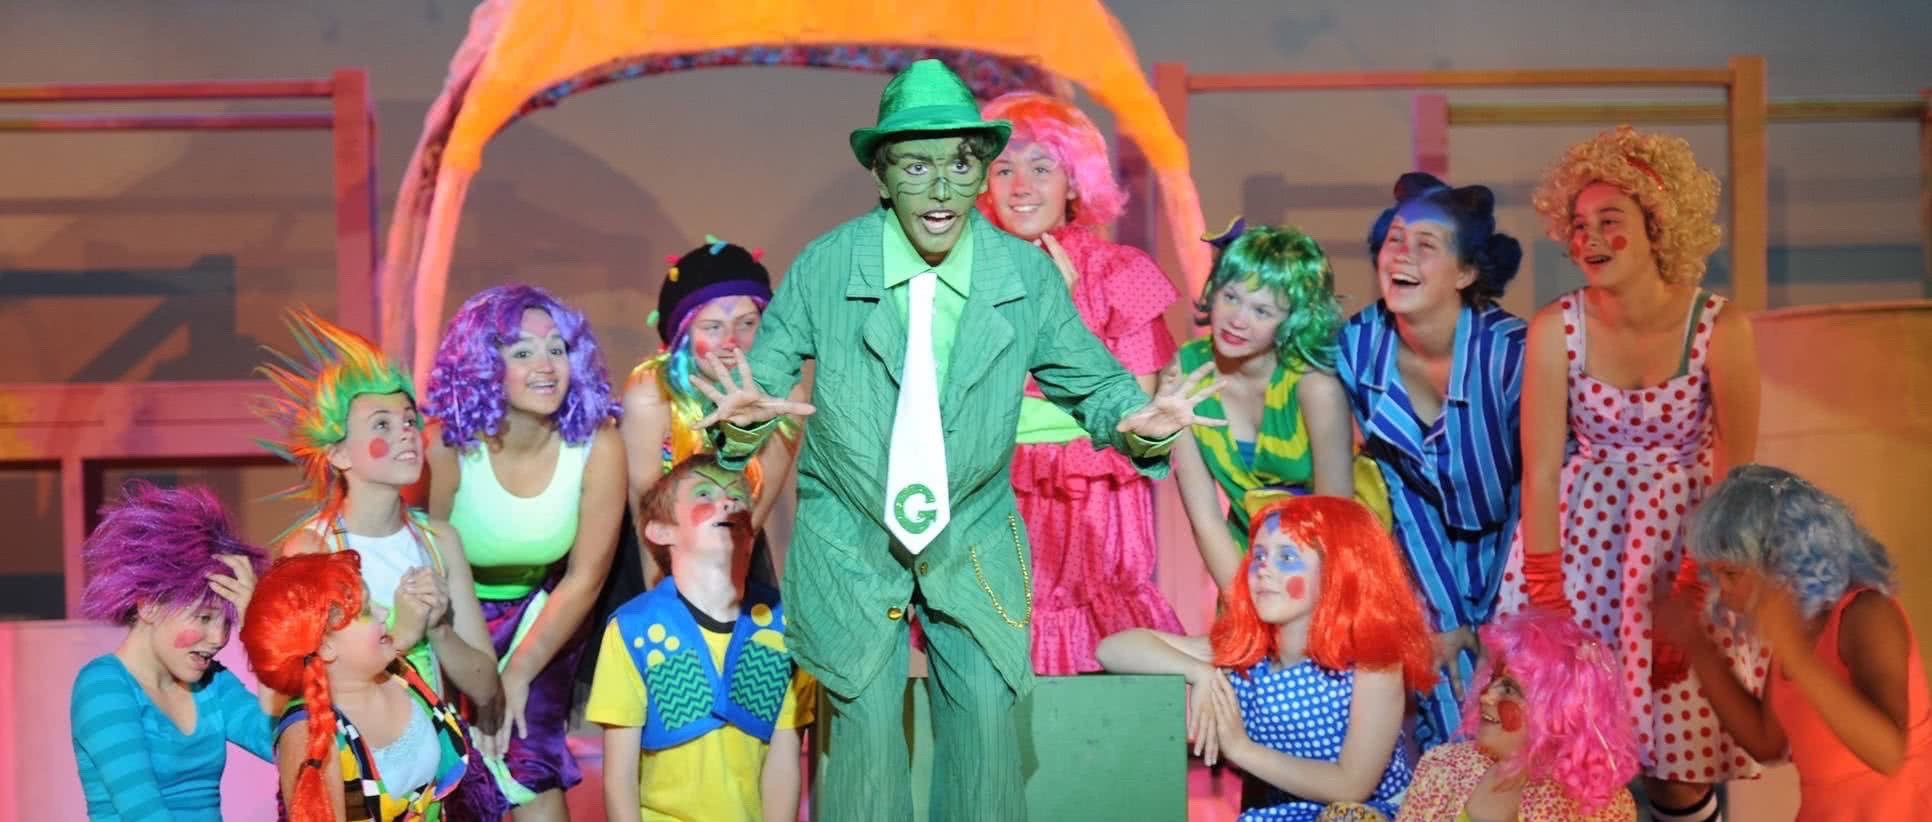 Tomorrow Youth Rep Banner image, from Seussical, 2015